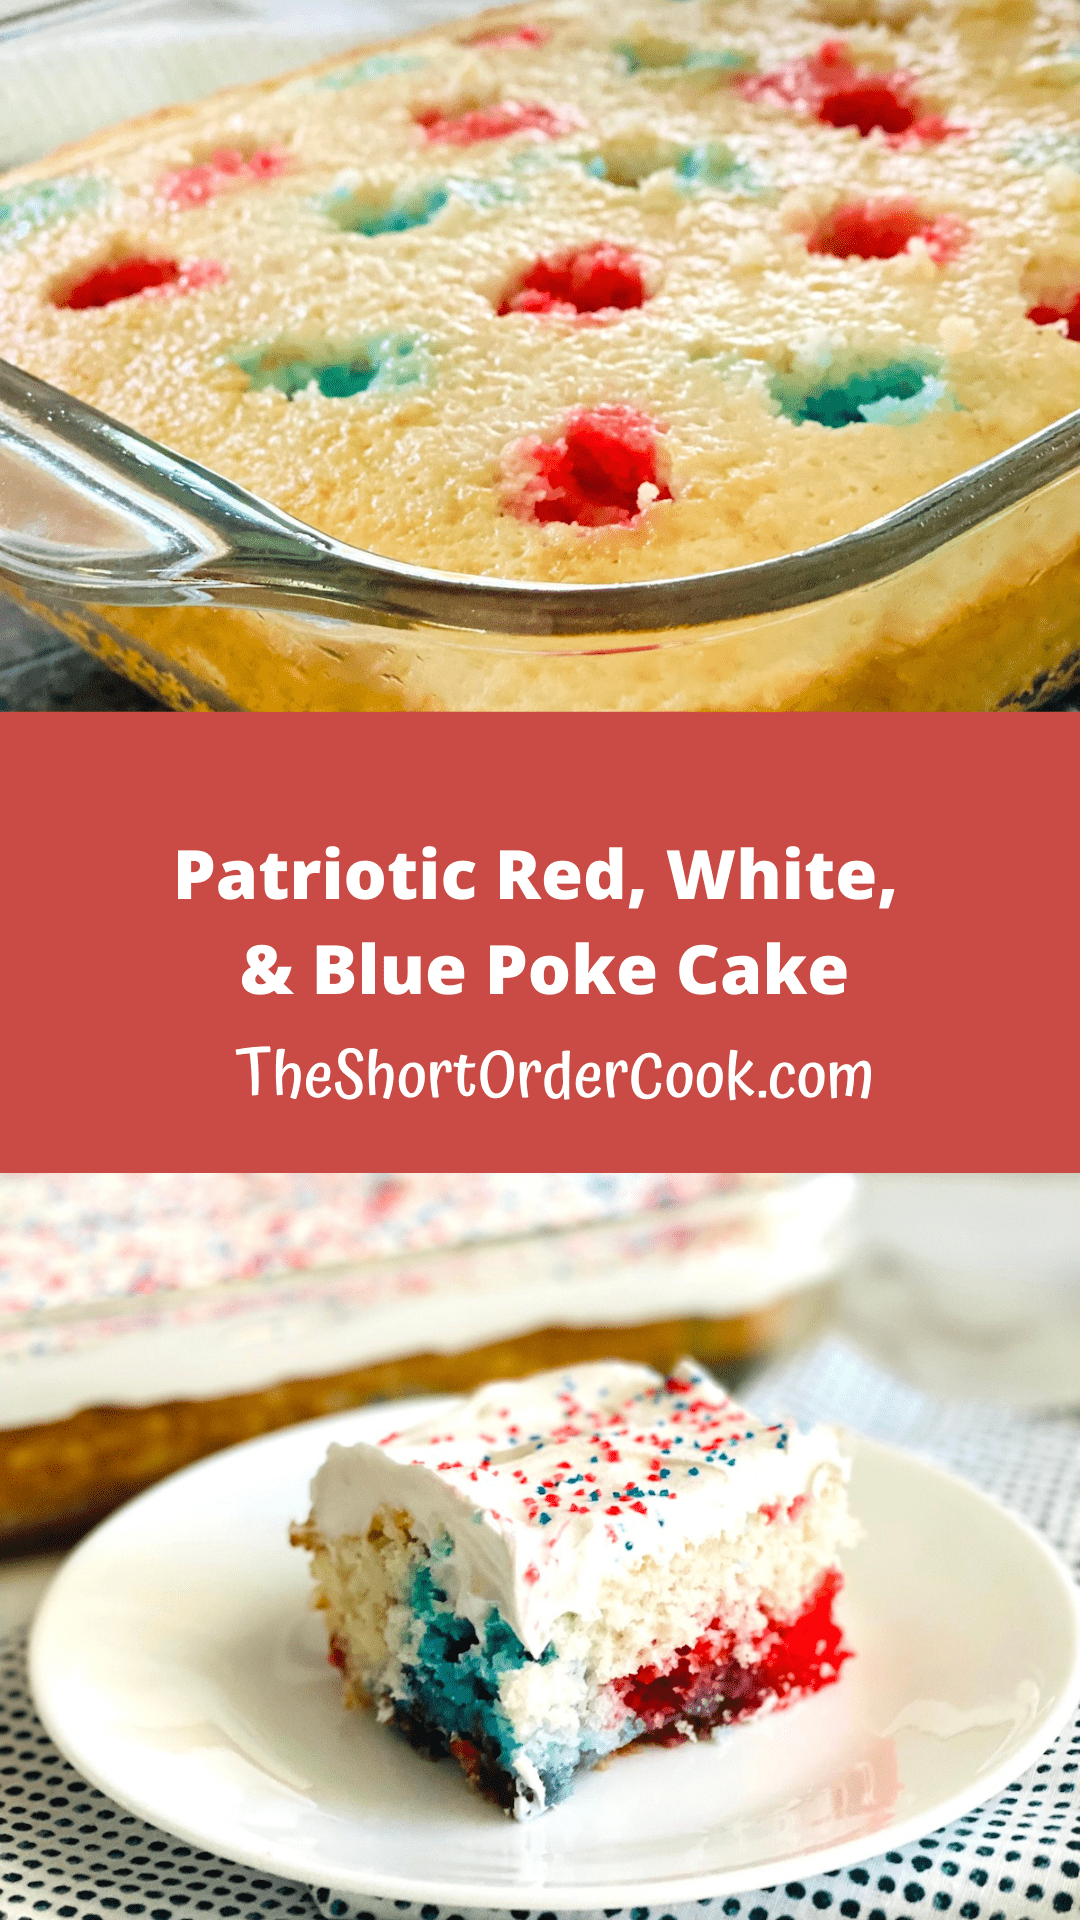 Two images for white cake poked with holes filled with red and blue jello and a sliced plated topped with coolwhip.